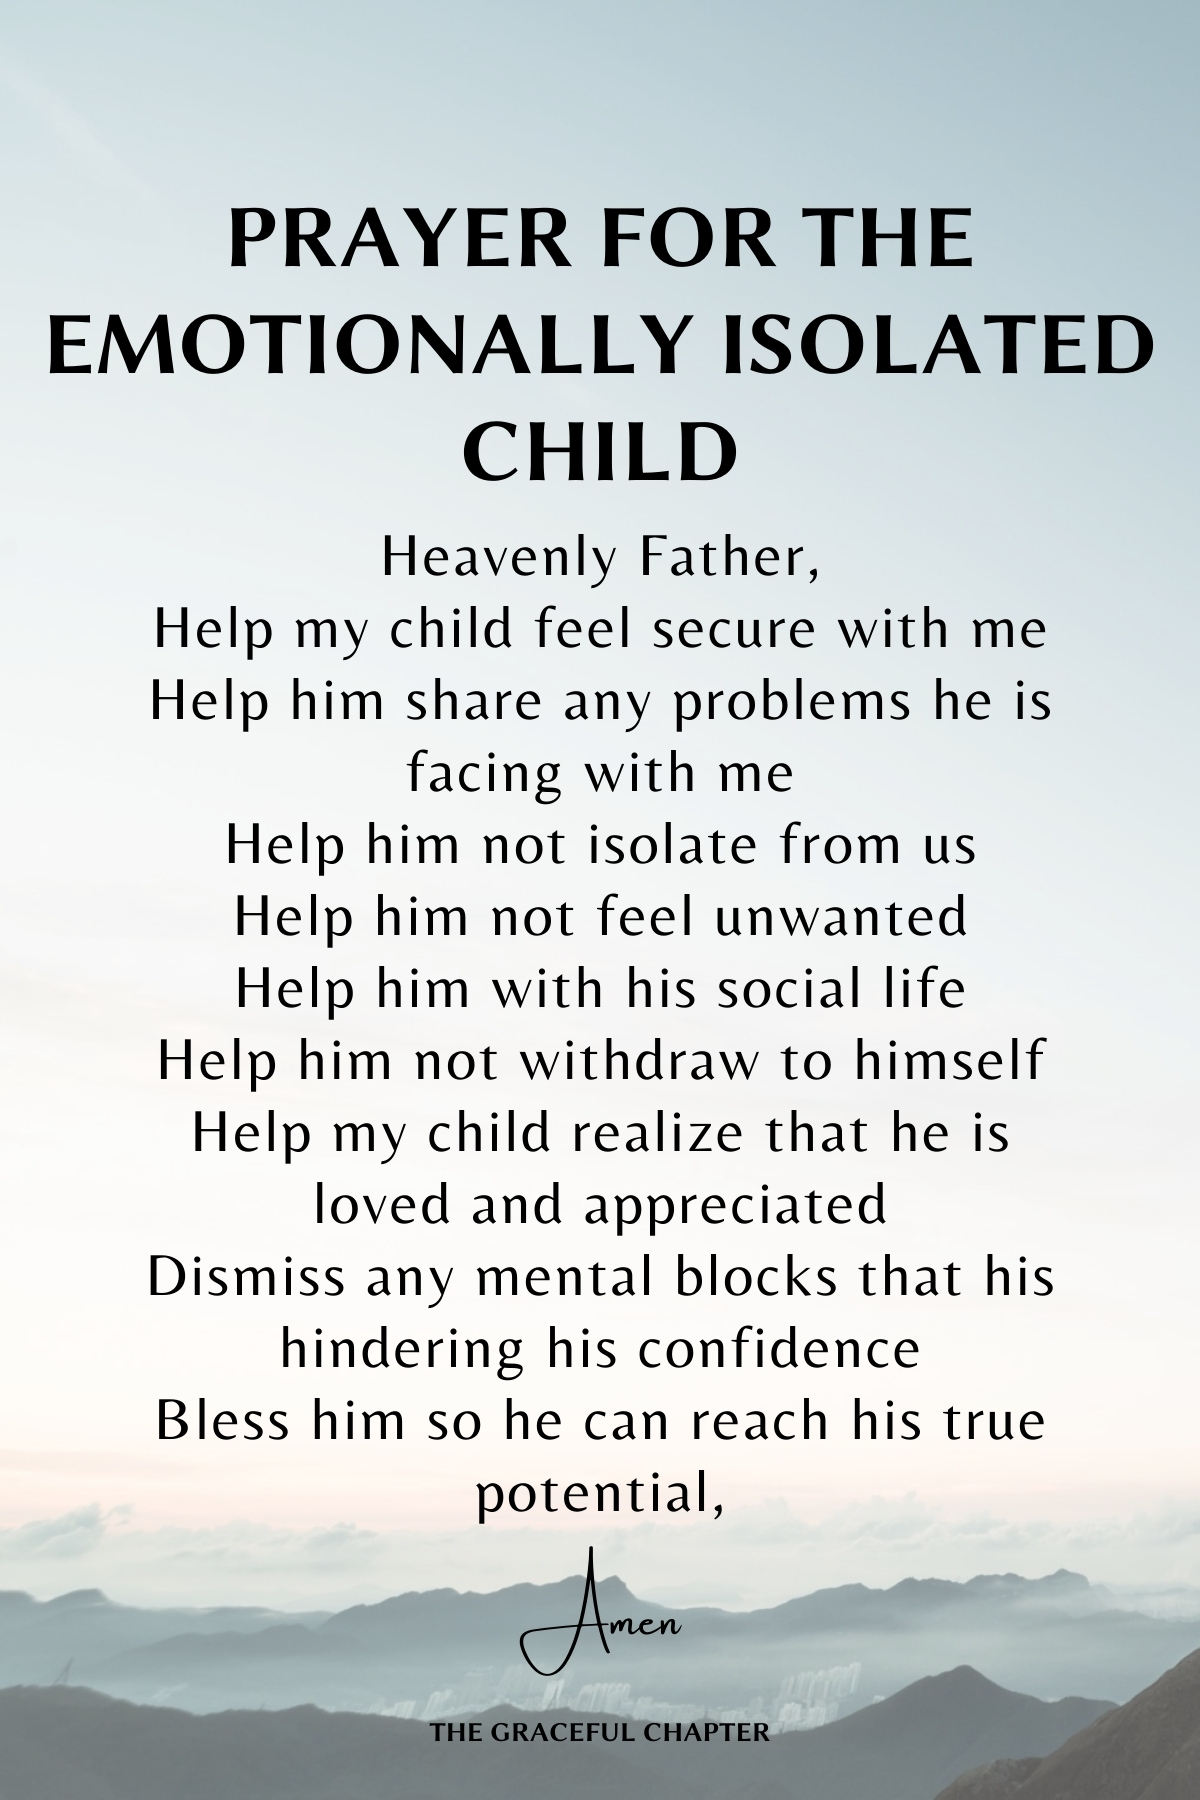 Prayer for the emotionally isolated child